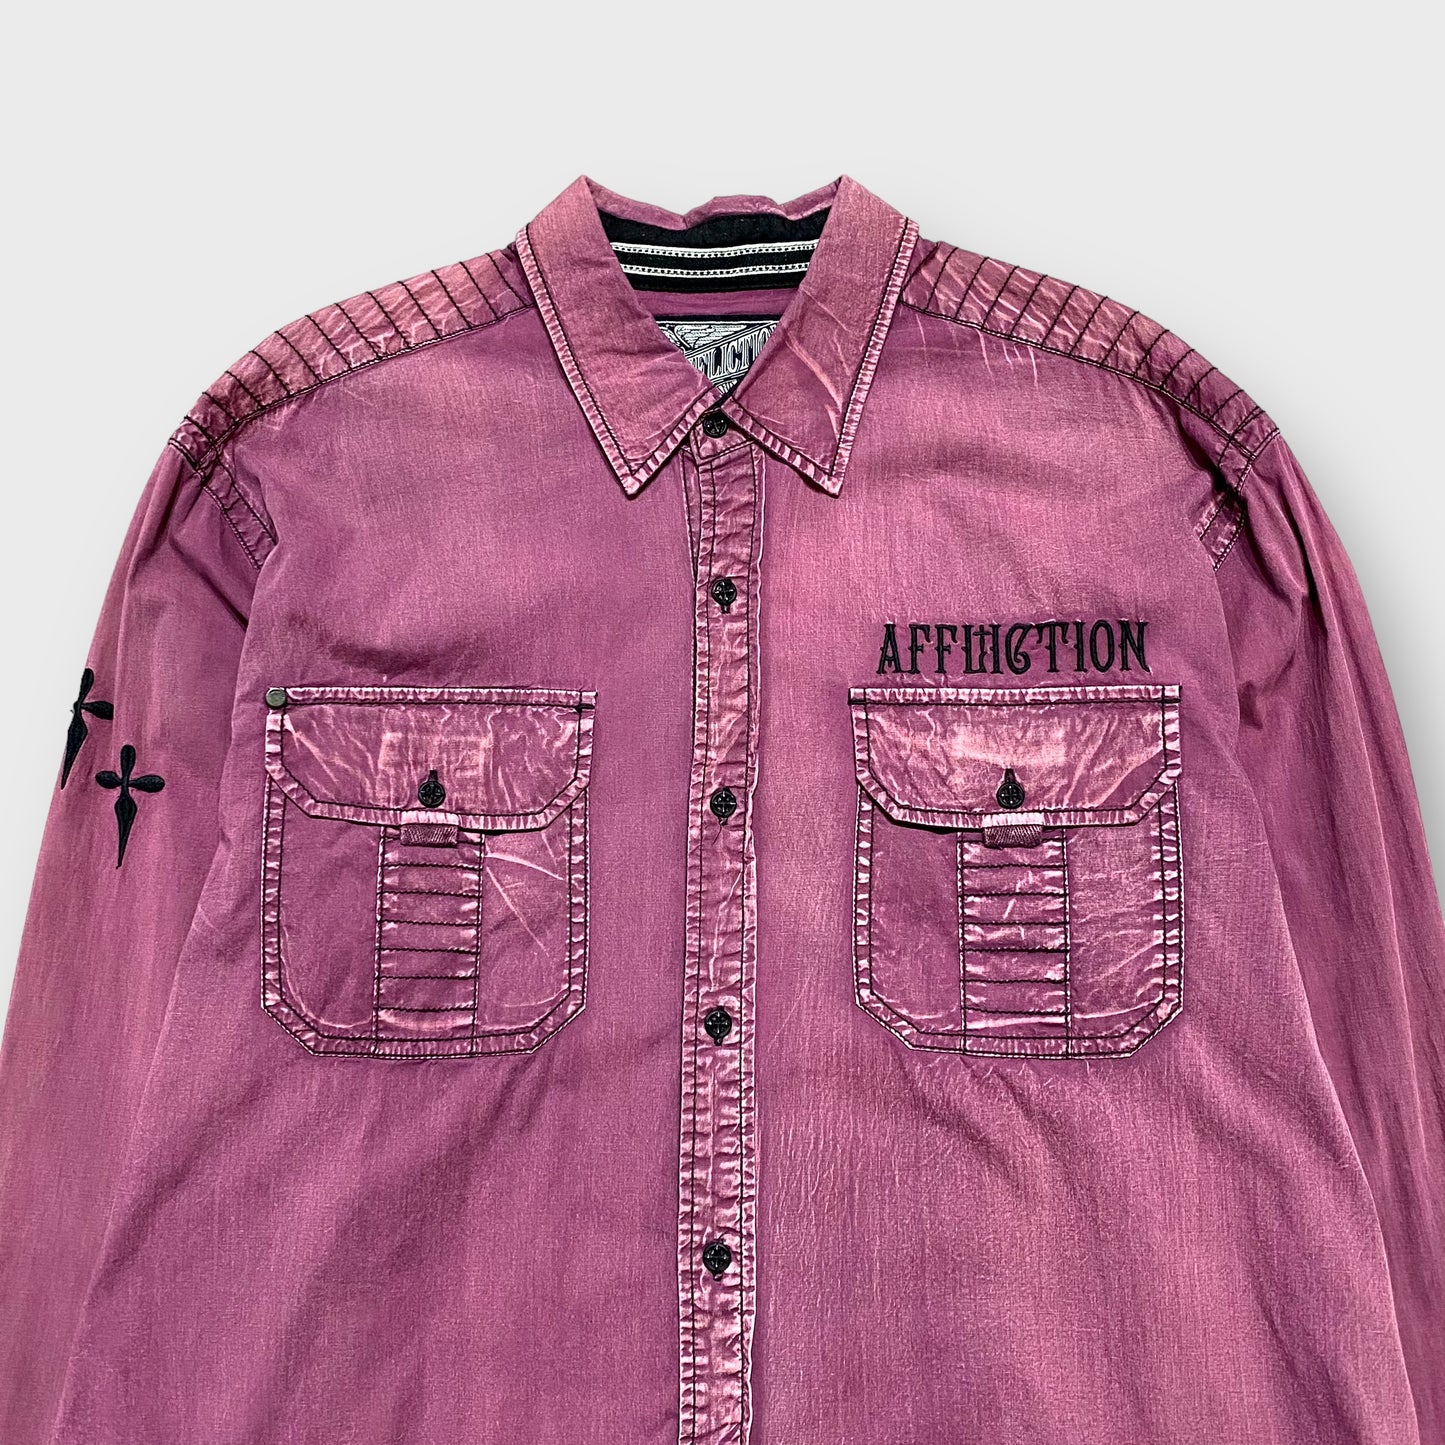 "AFFLICTION" Faded work shirt